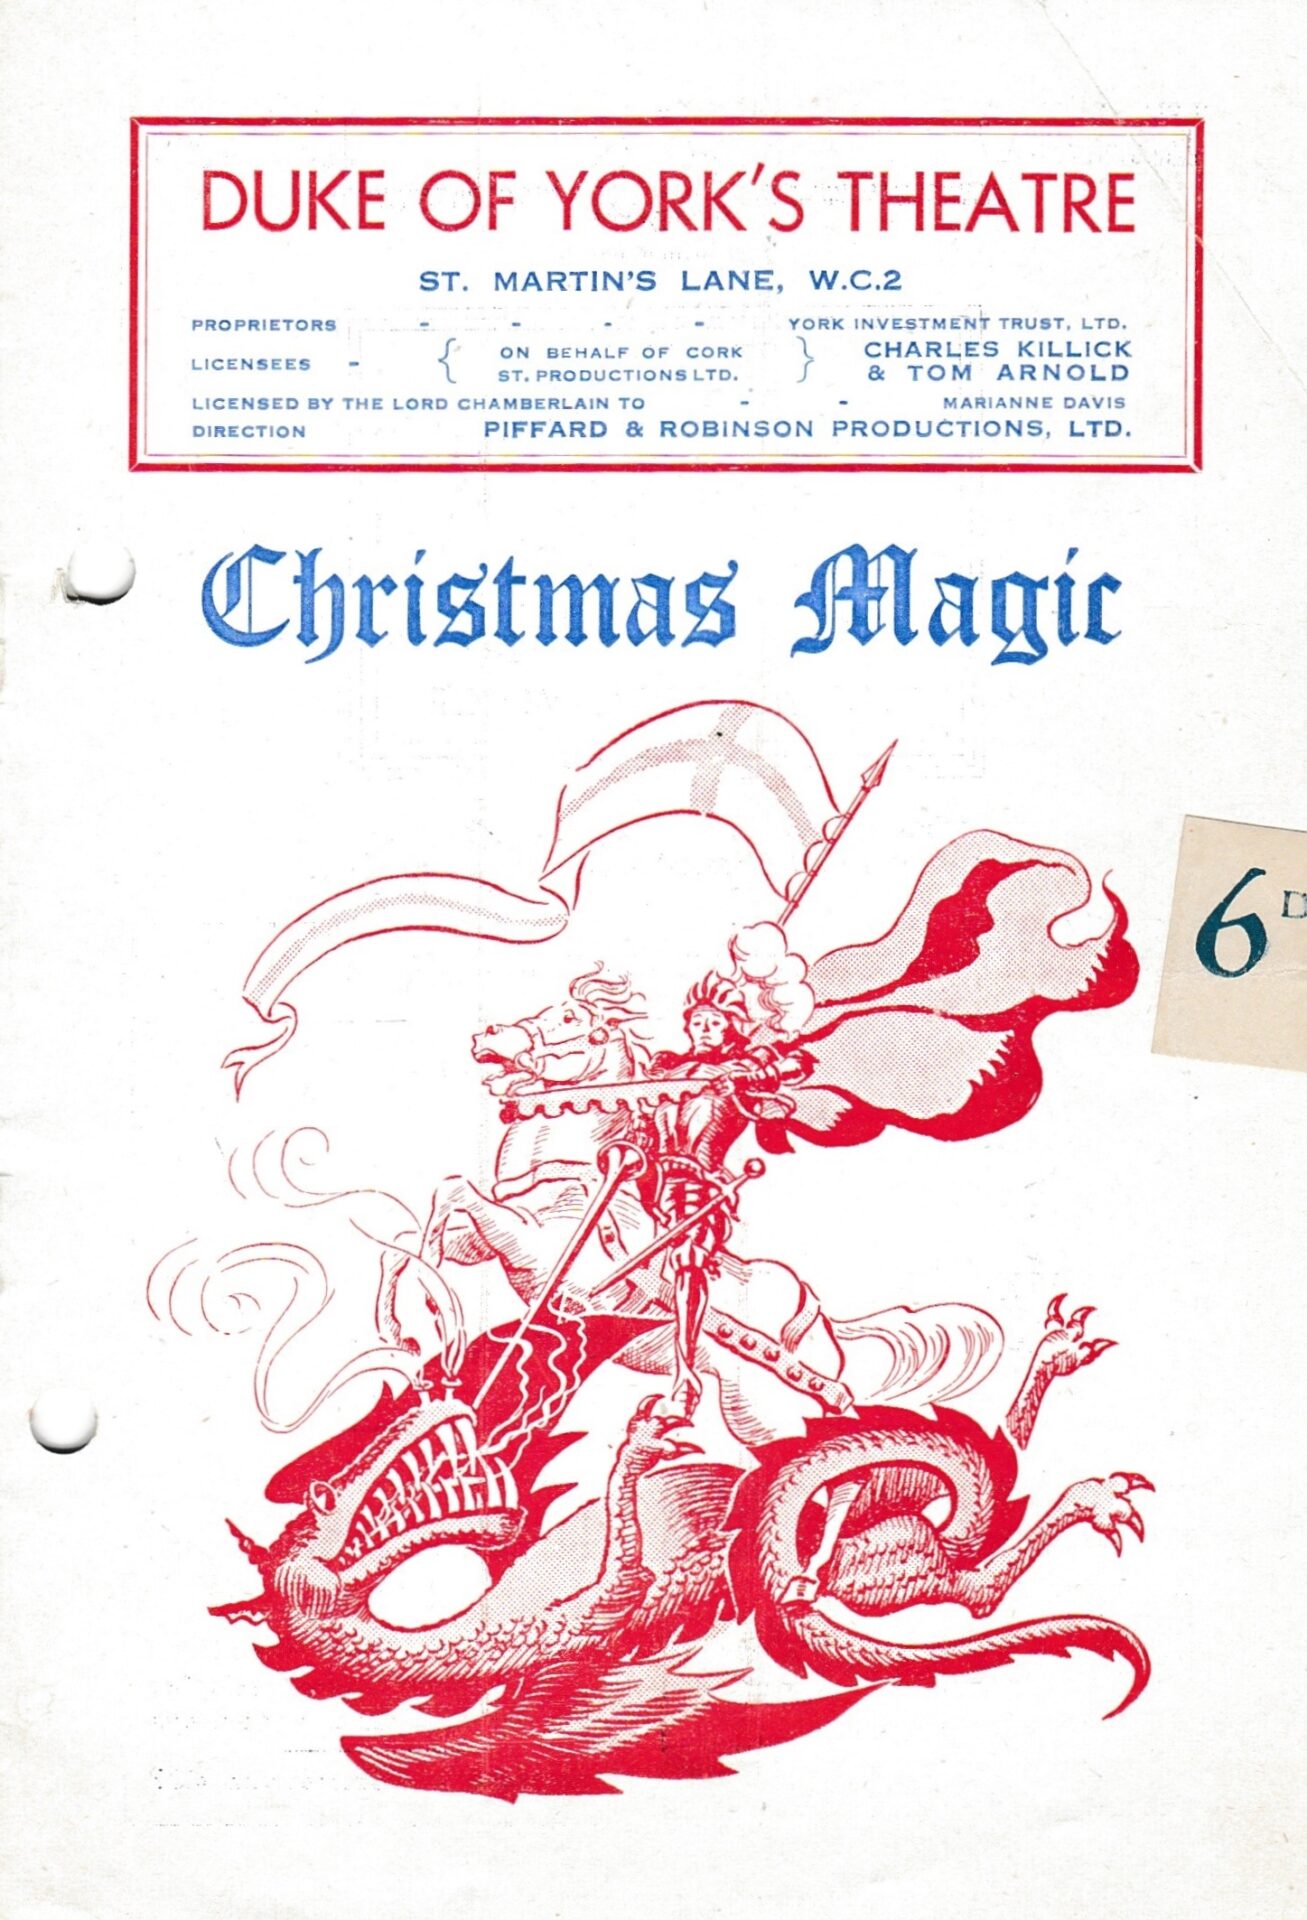 Christmas Magic at the Duke of York’s Theatre, London, Boxing Day to 21 January 1950